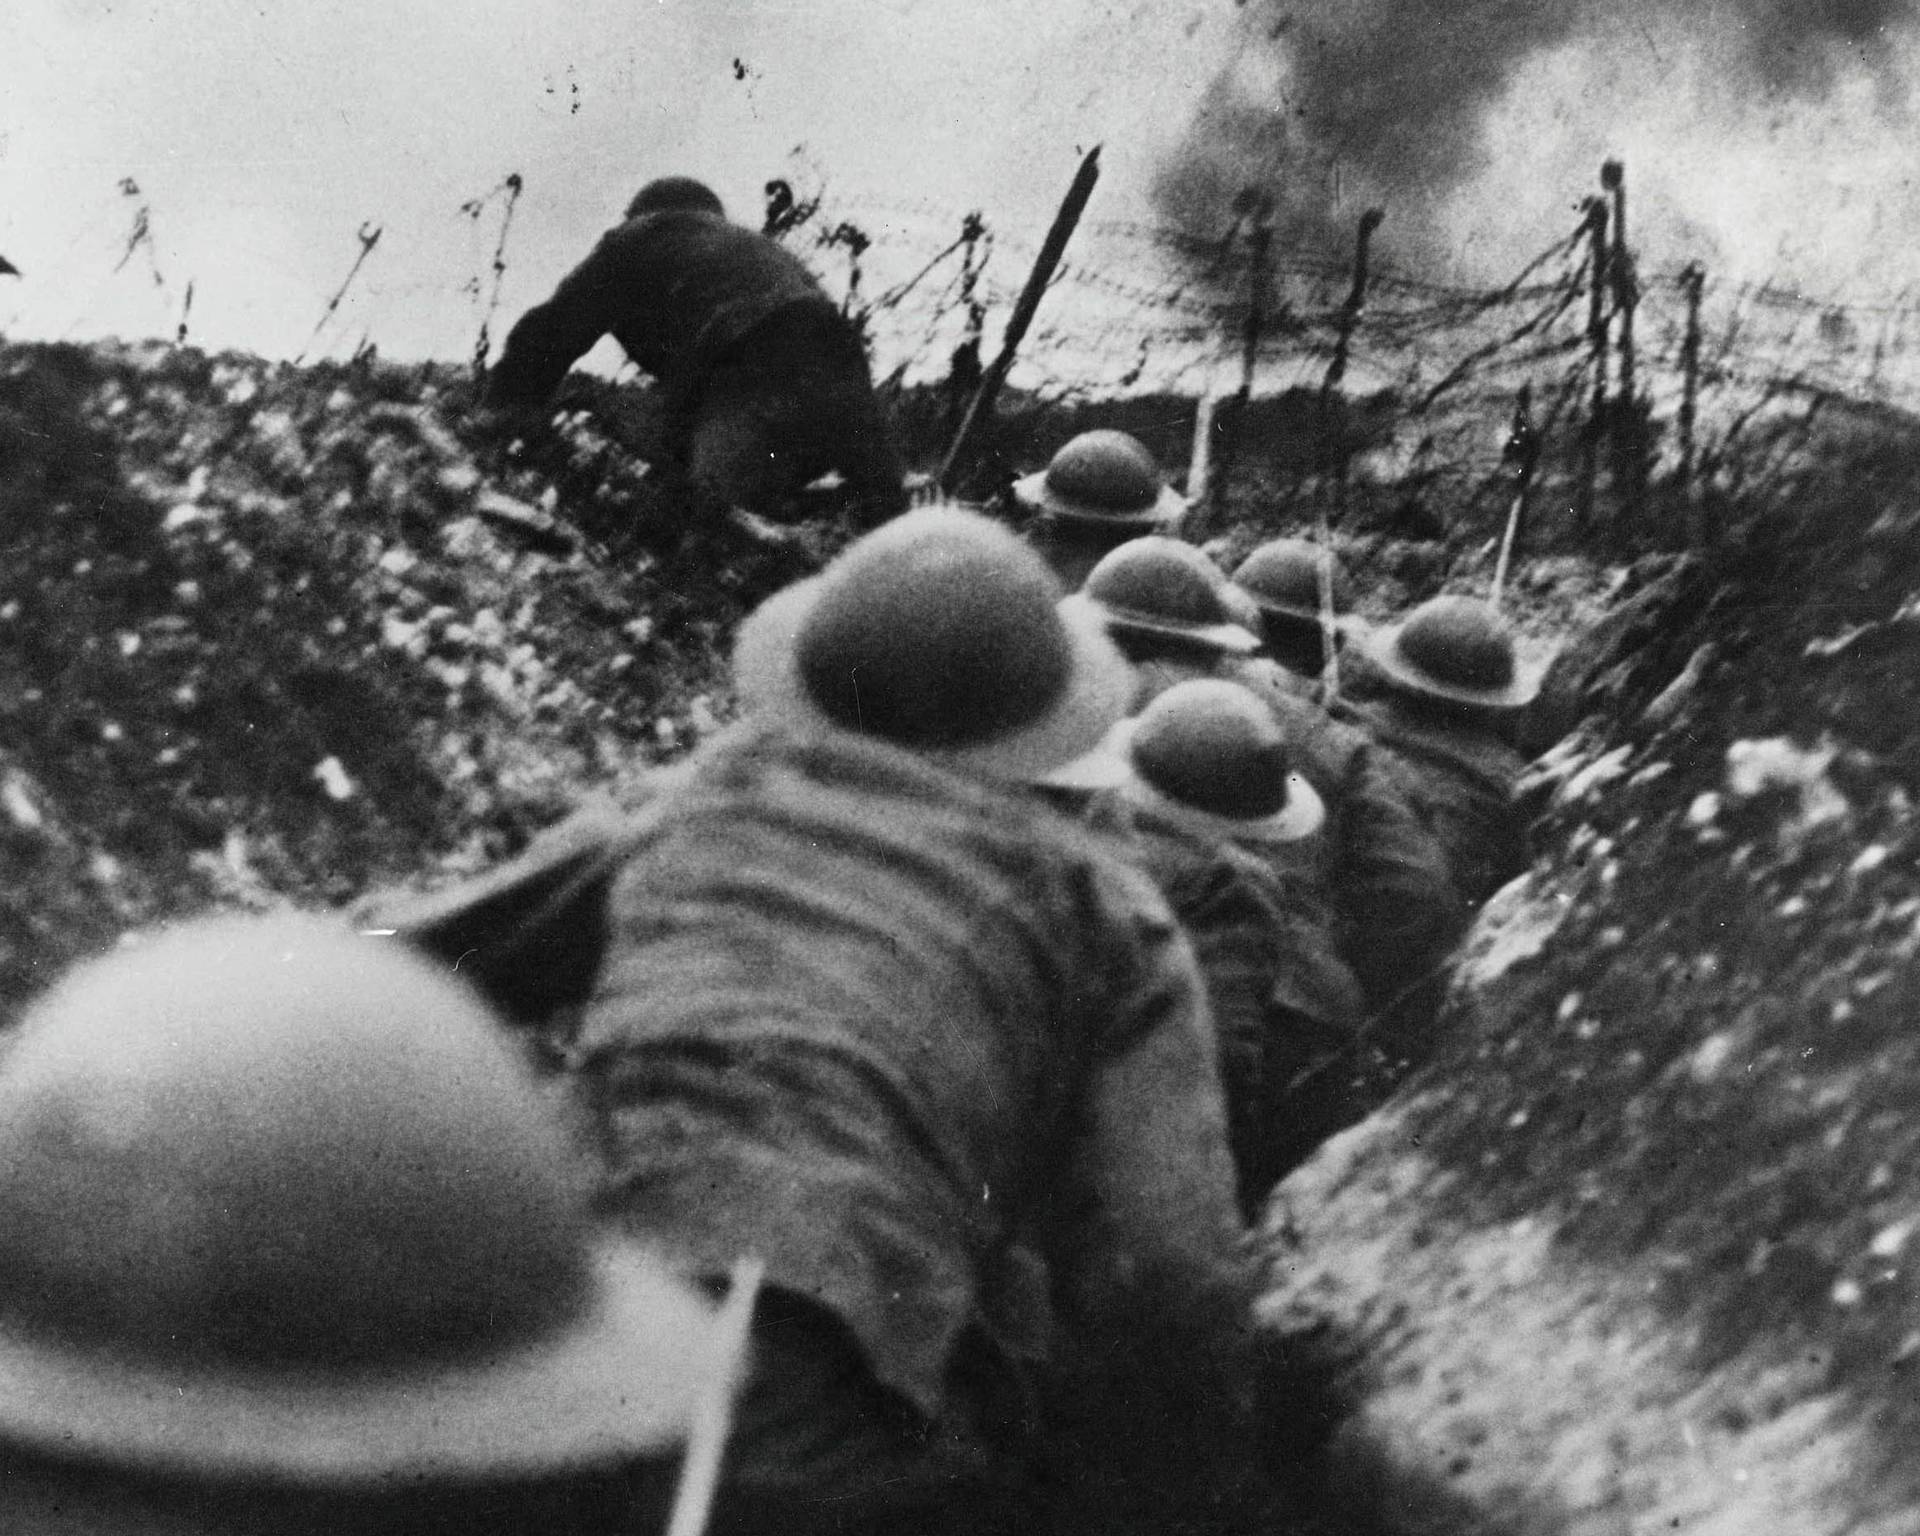 First world war: British troops go over the top in the trenches during the battle of the Somme